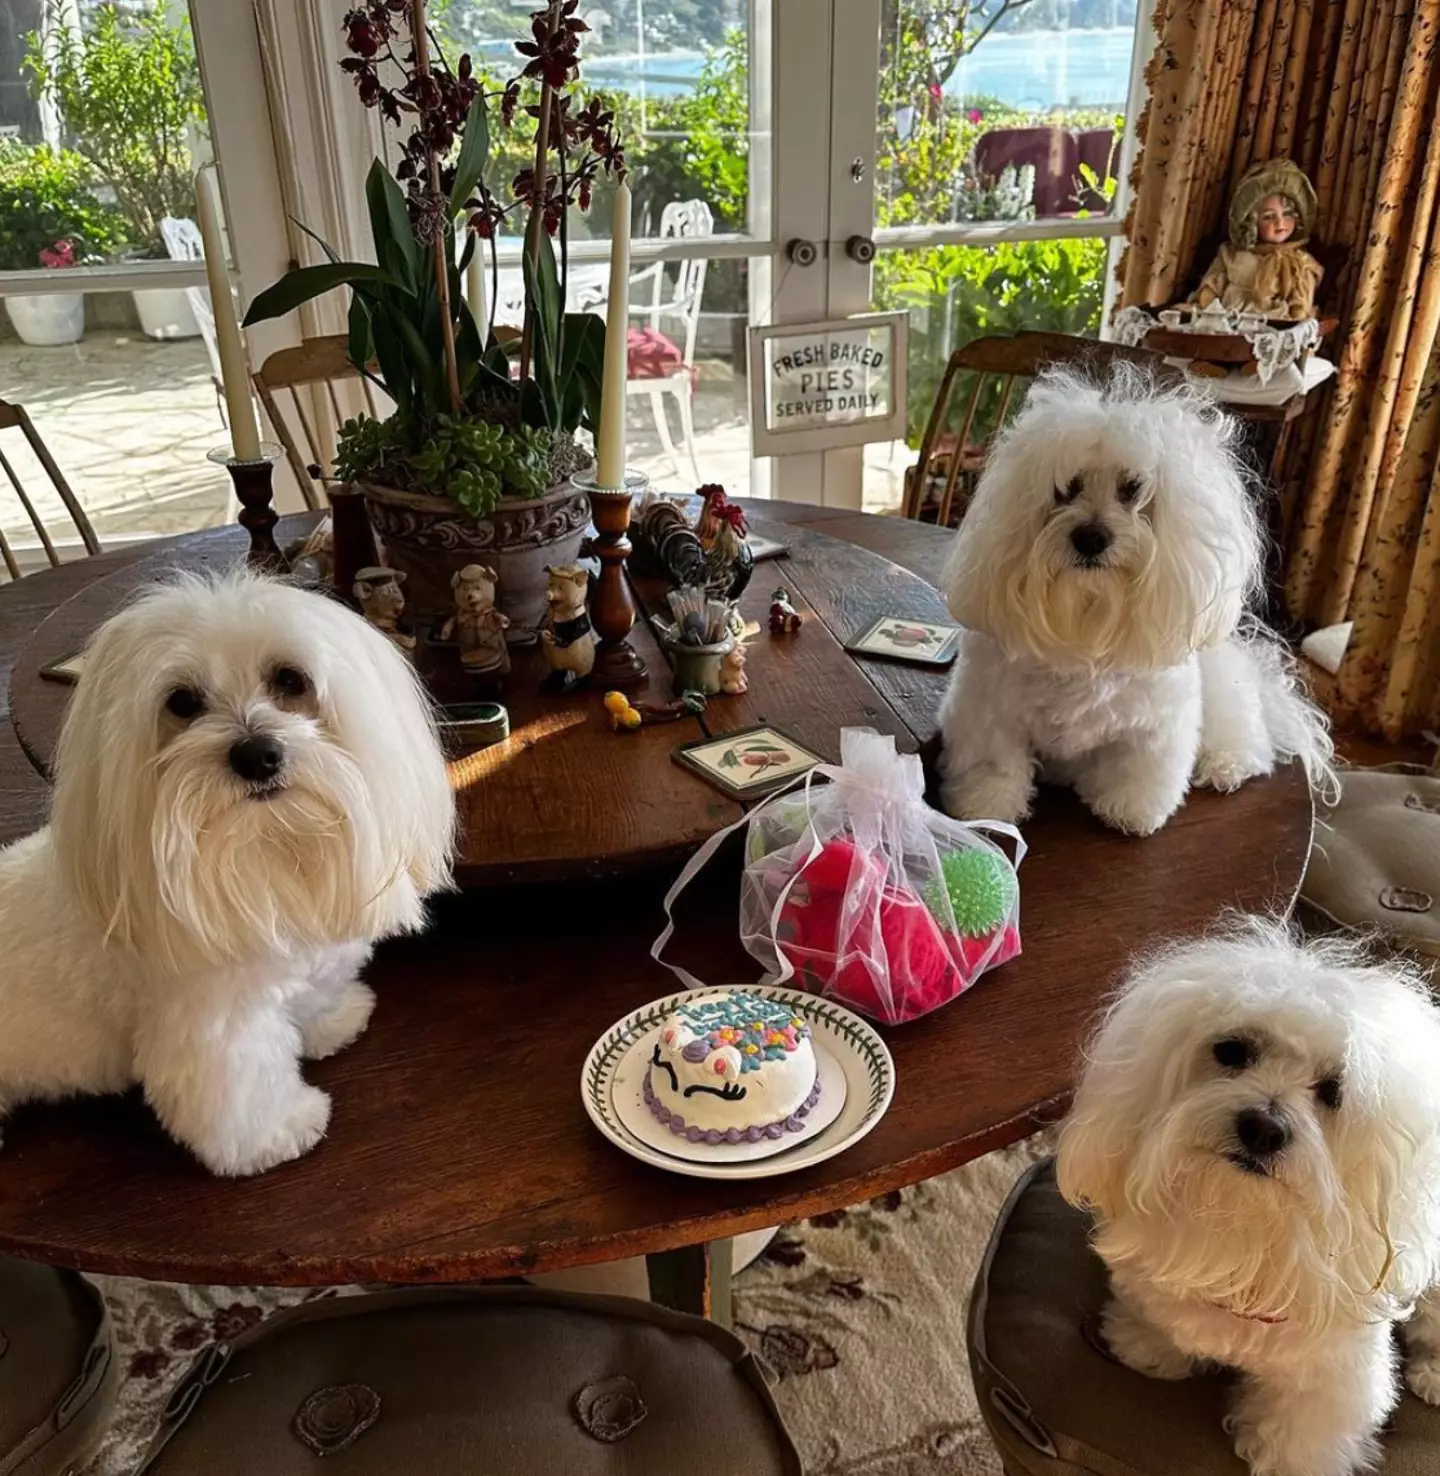 The pampered pooches have a lavish lifestyle.